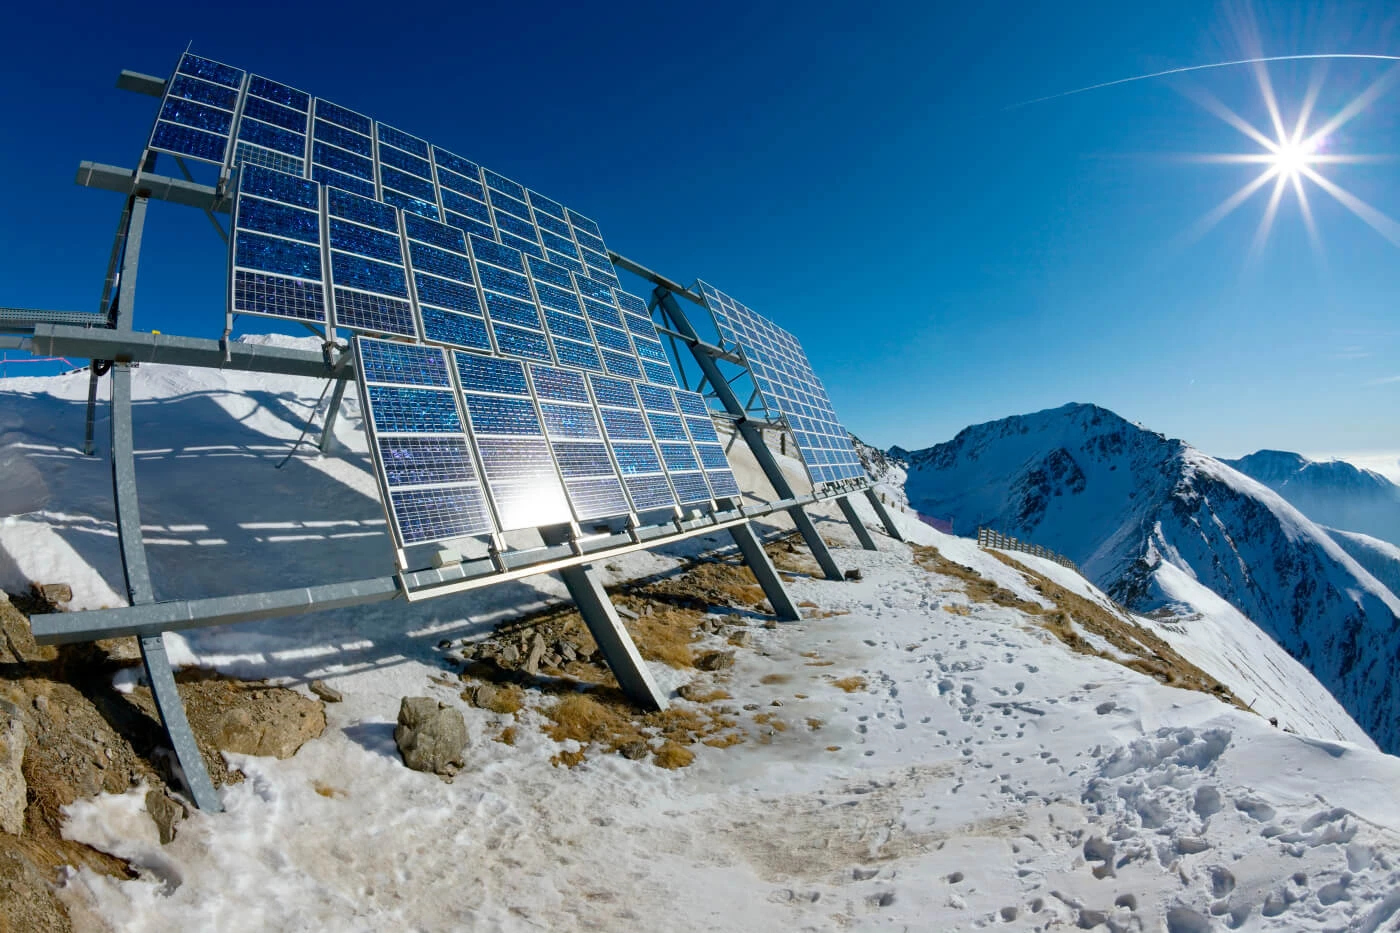 A solar panel installed on a snow-covered mountain reflects the sunlight